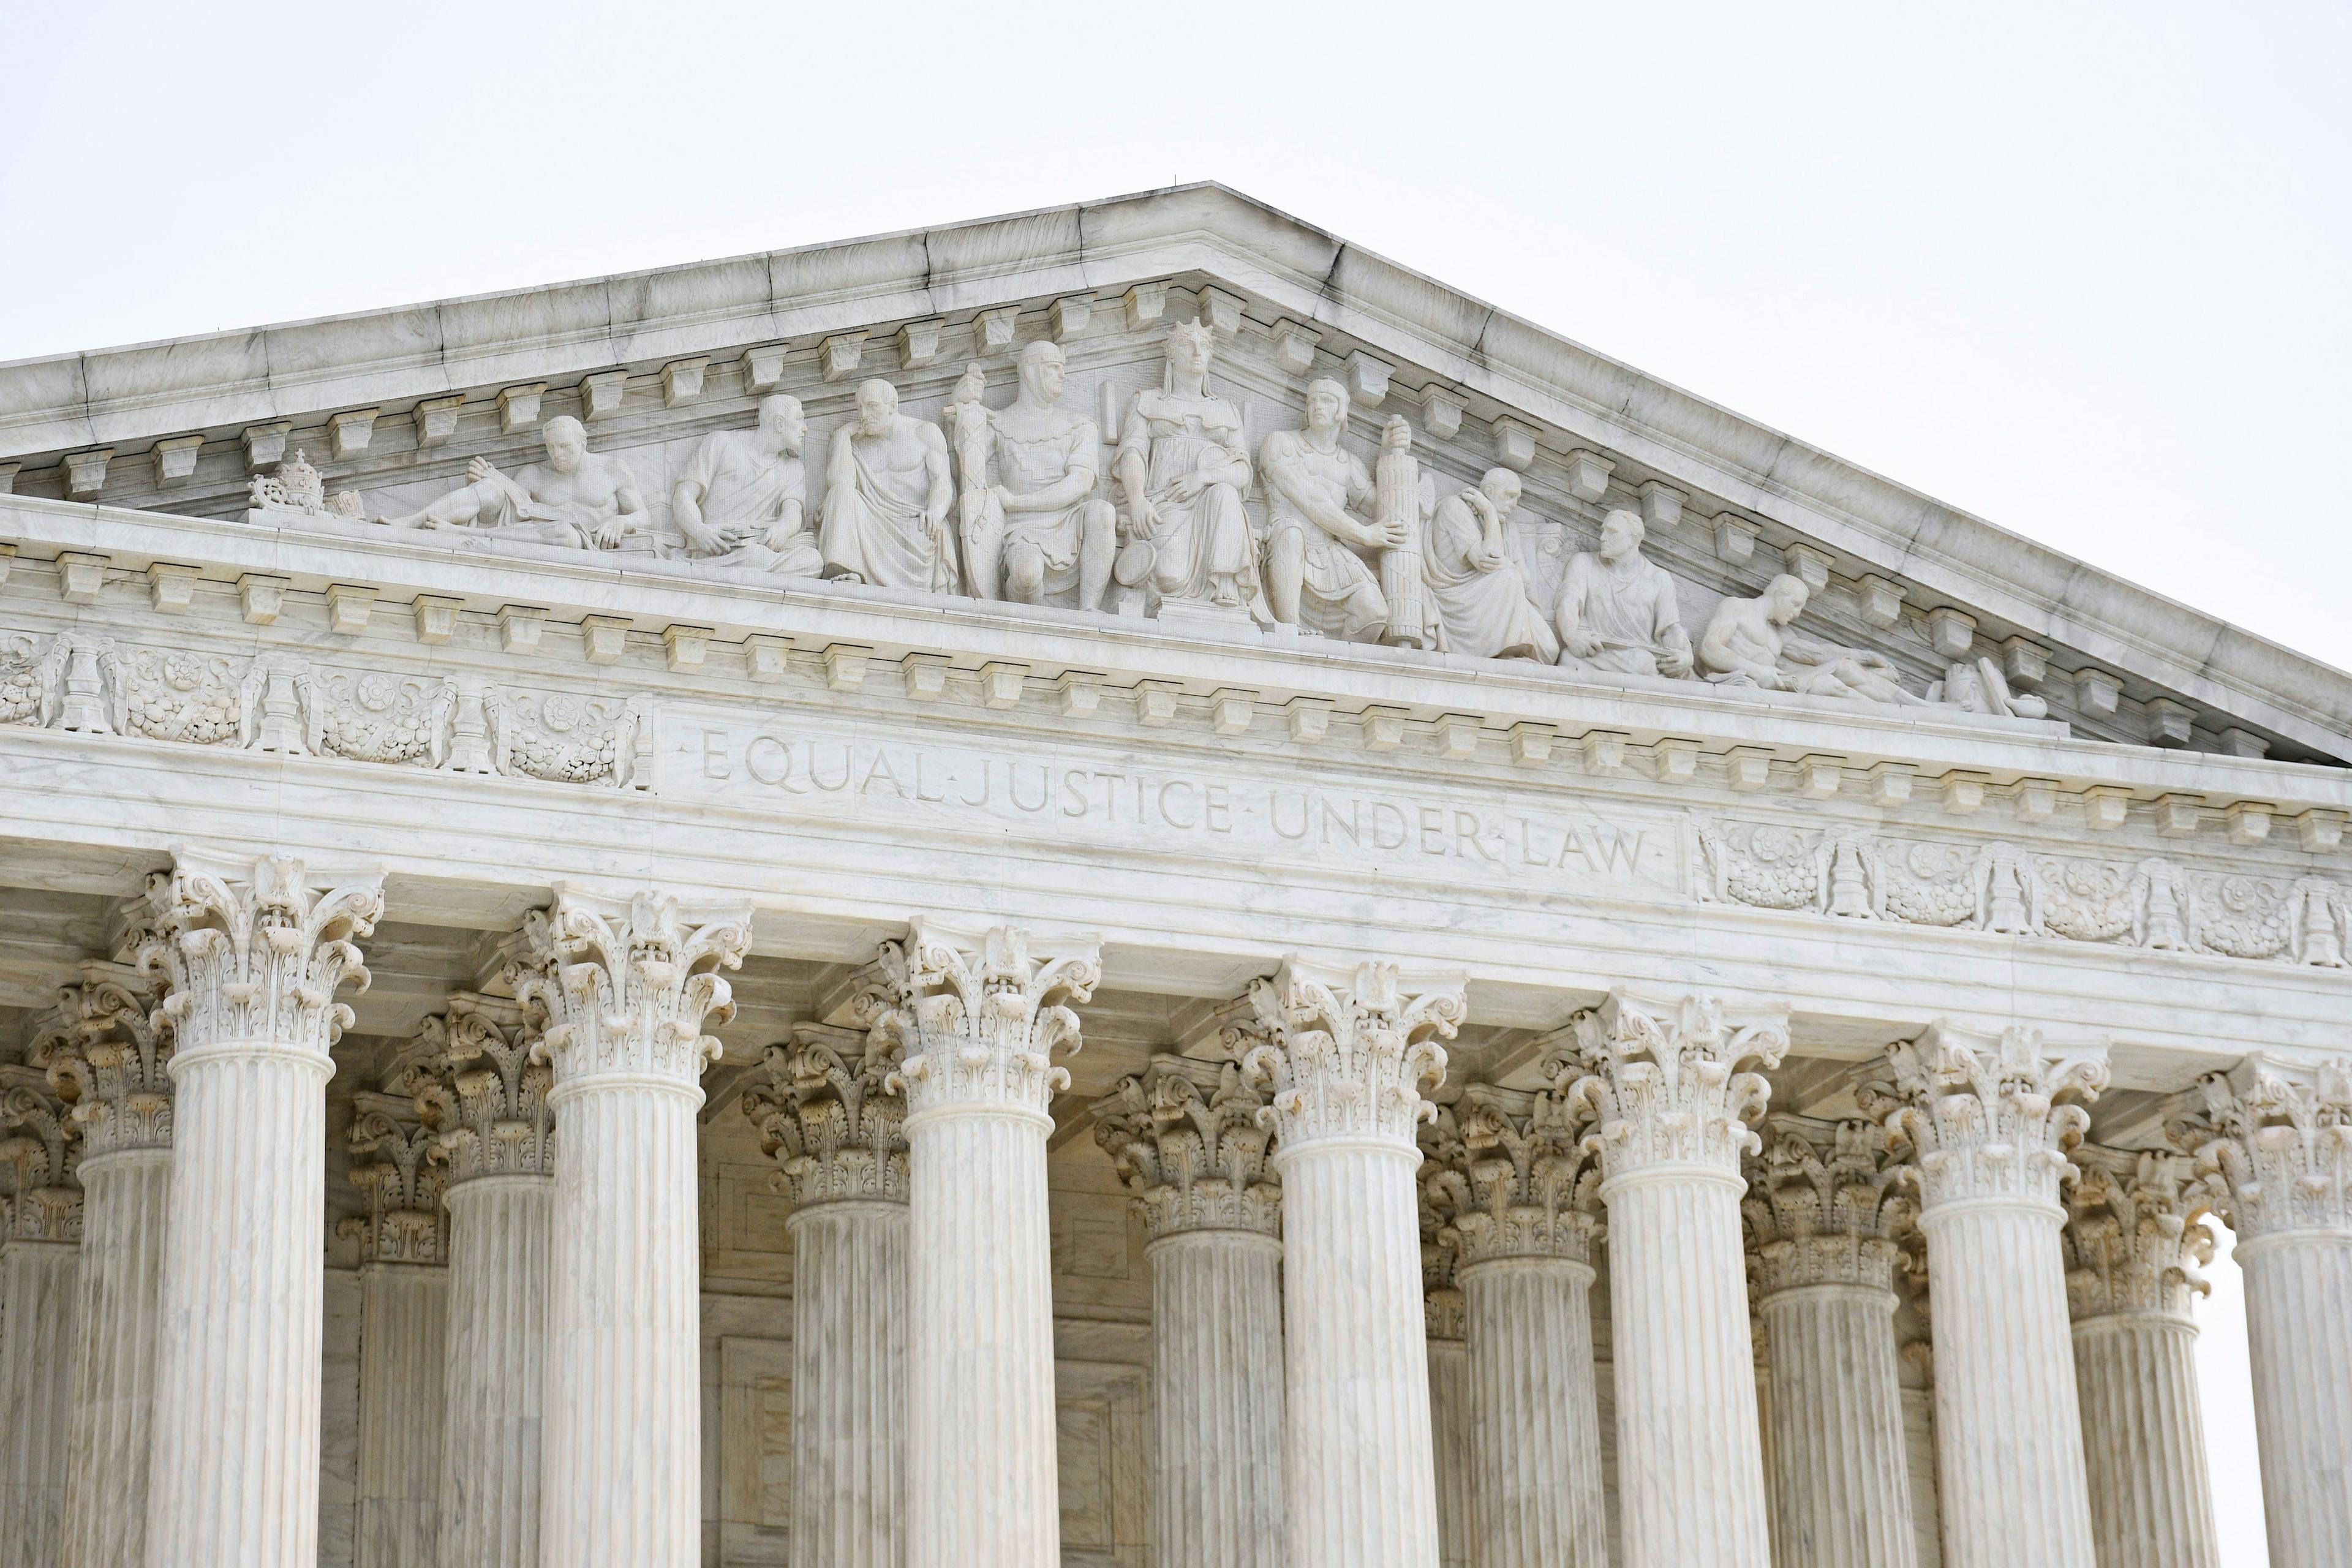 The Supreme Court's conservative majority ruled that's its unconstitutional for colleges to consider race in admissions. (Image credit: ©Ryan Tishken - stock.adobe.com)